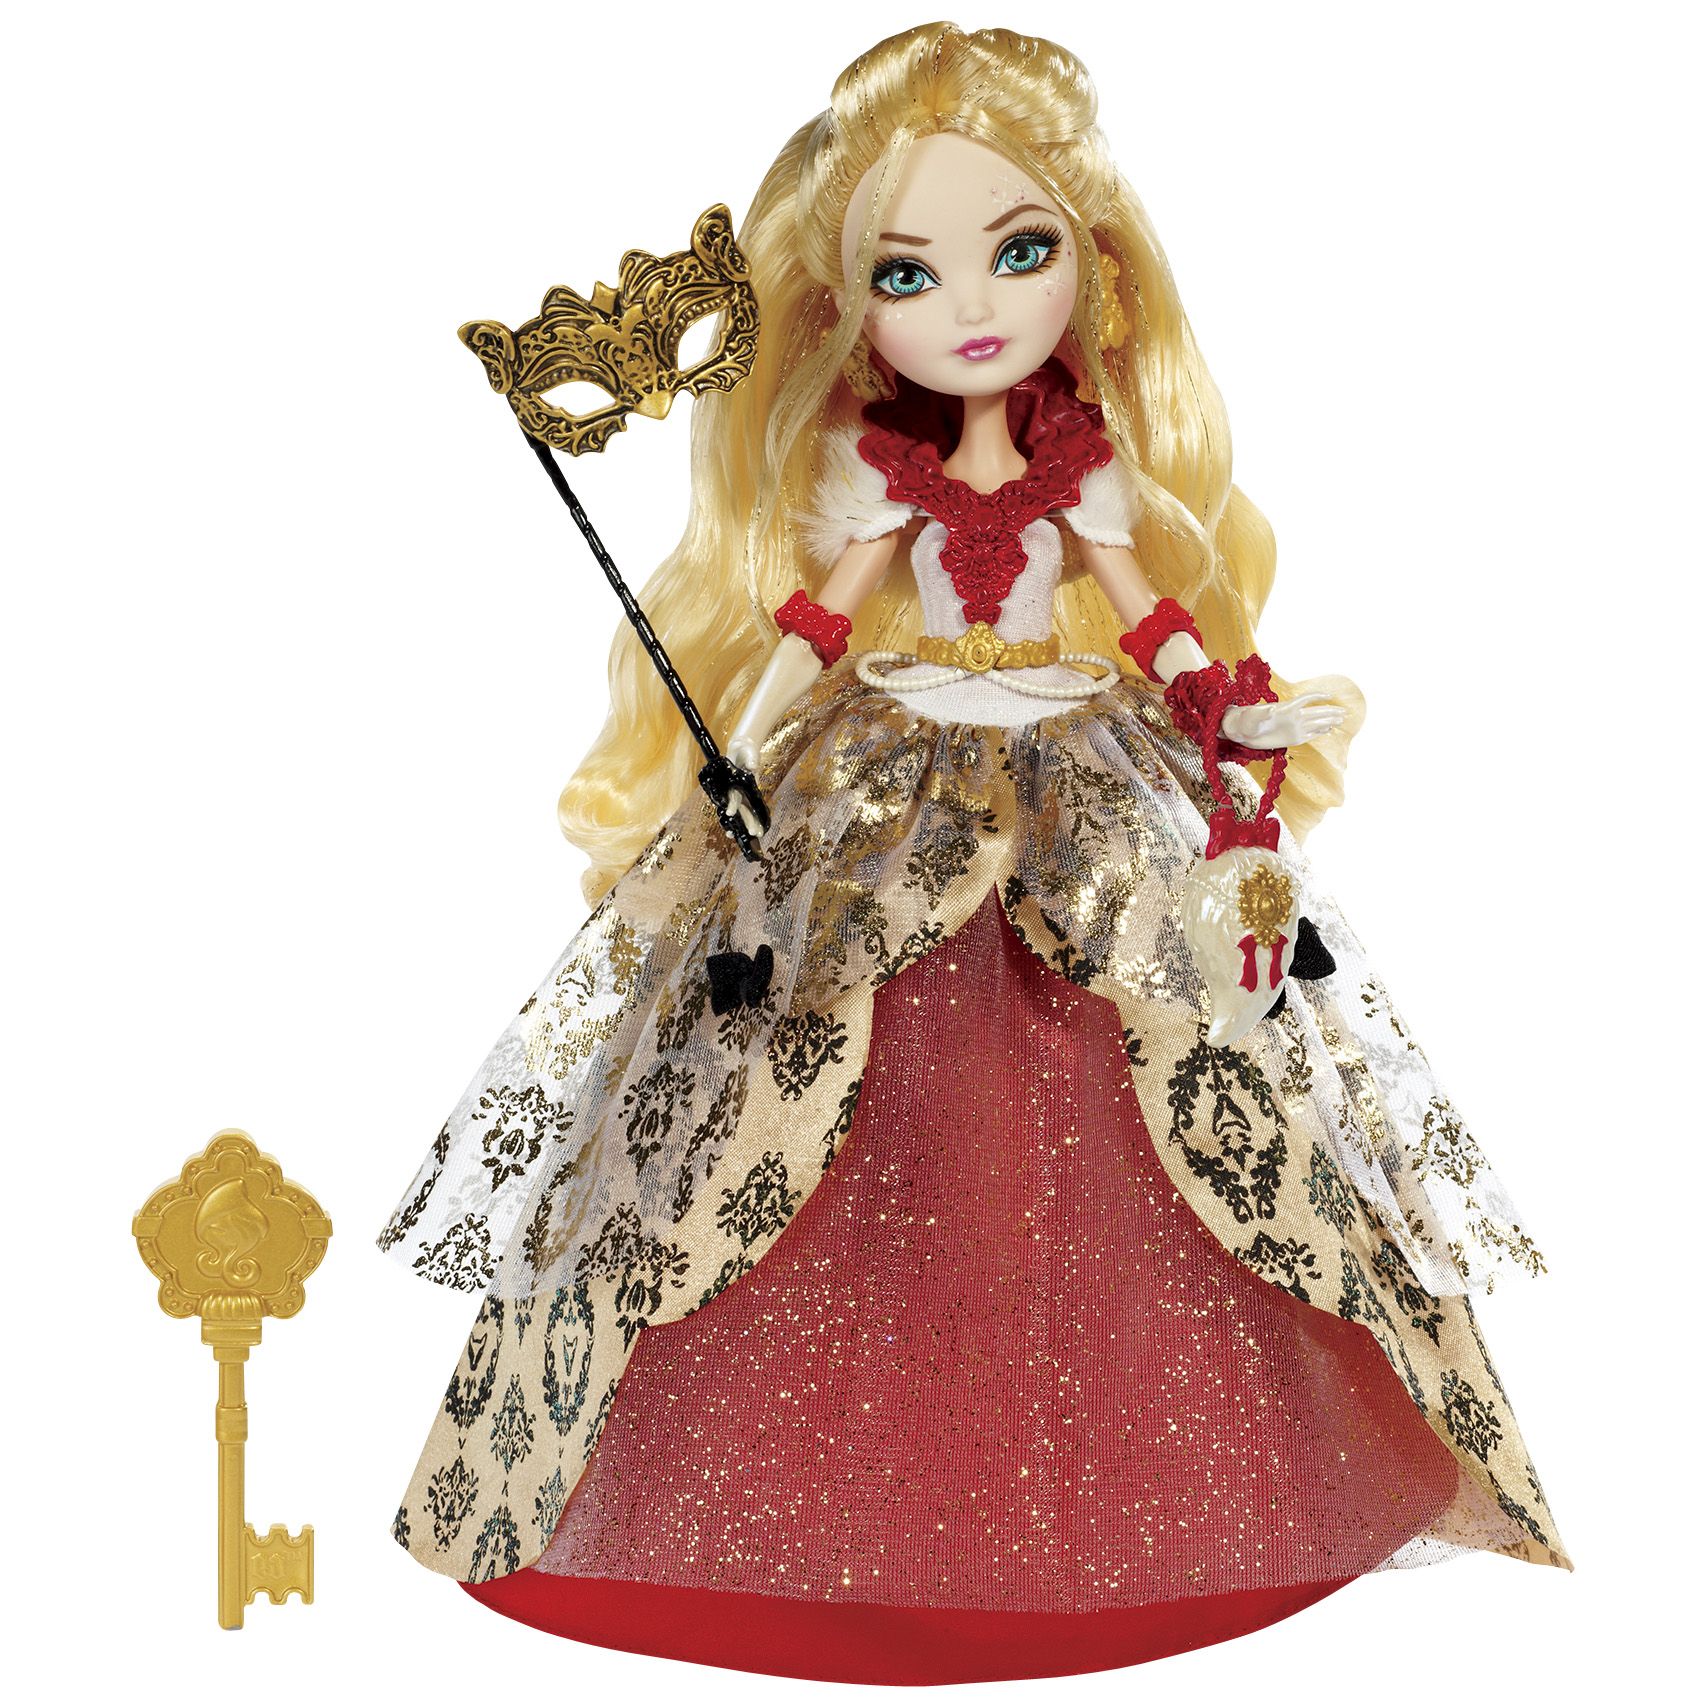  Ever After High Apple White Doll : Toys & Games